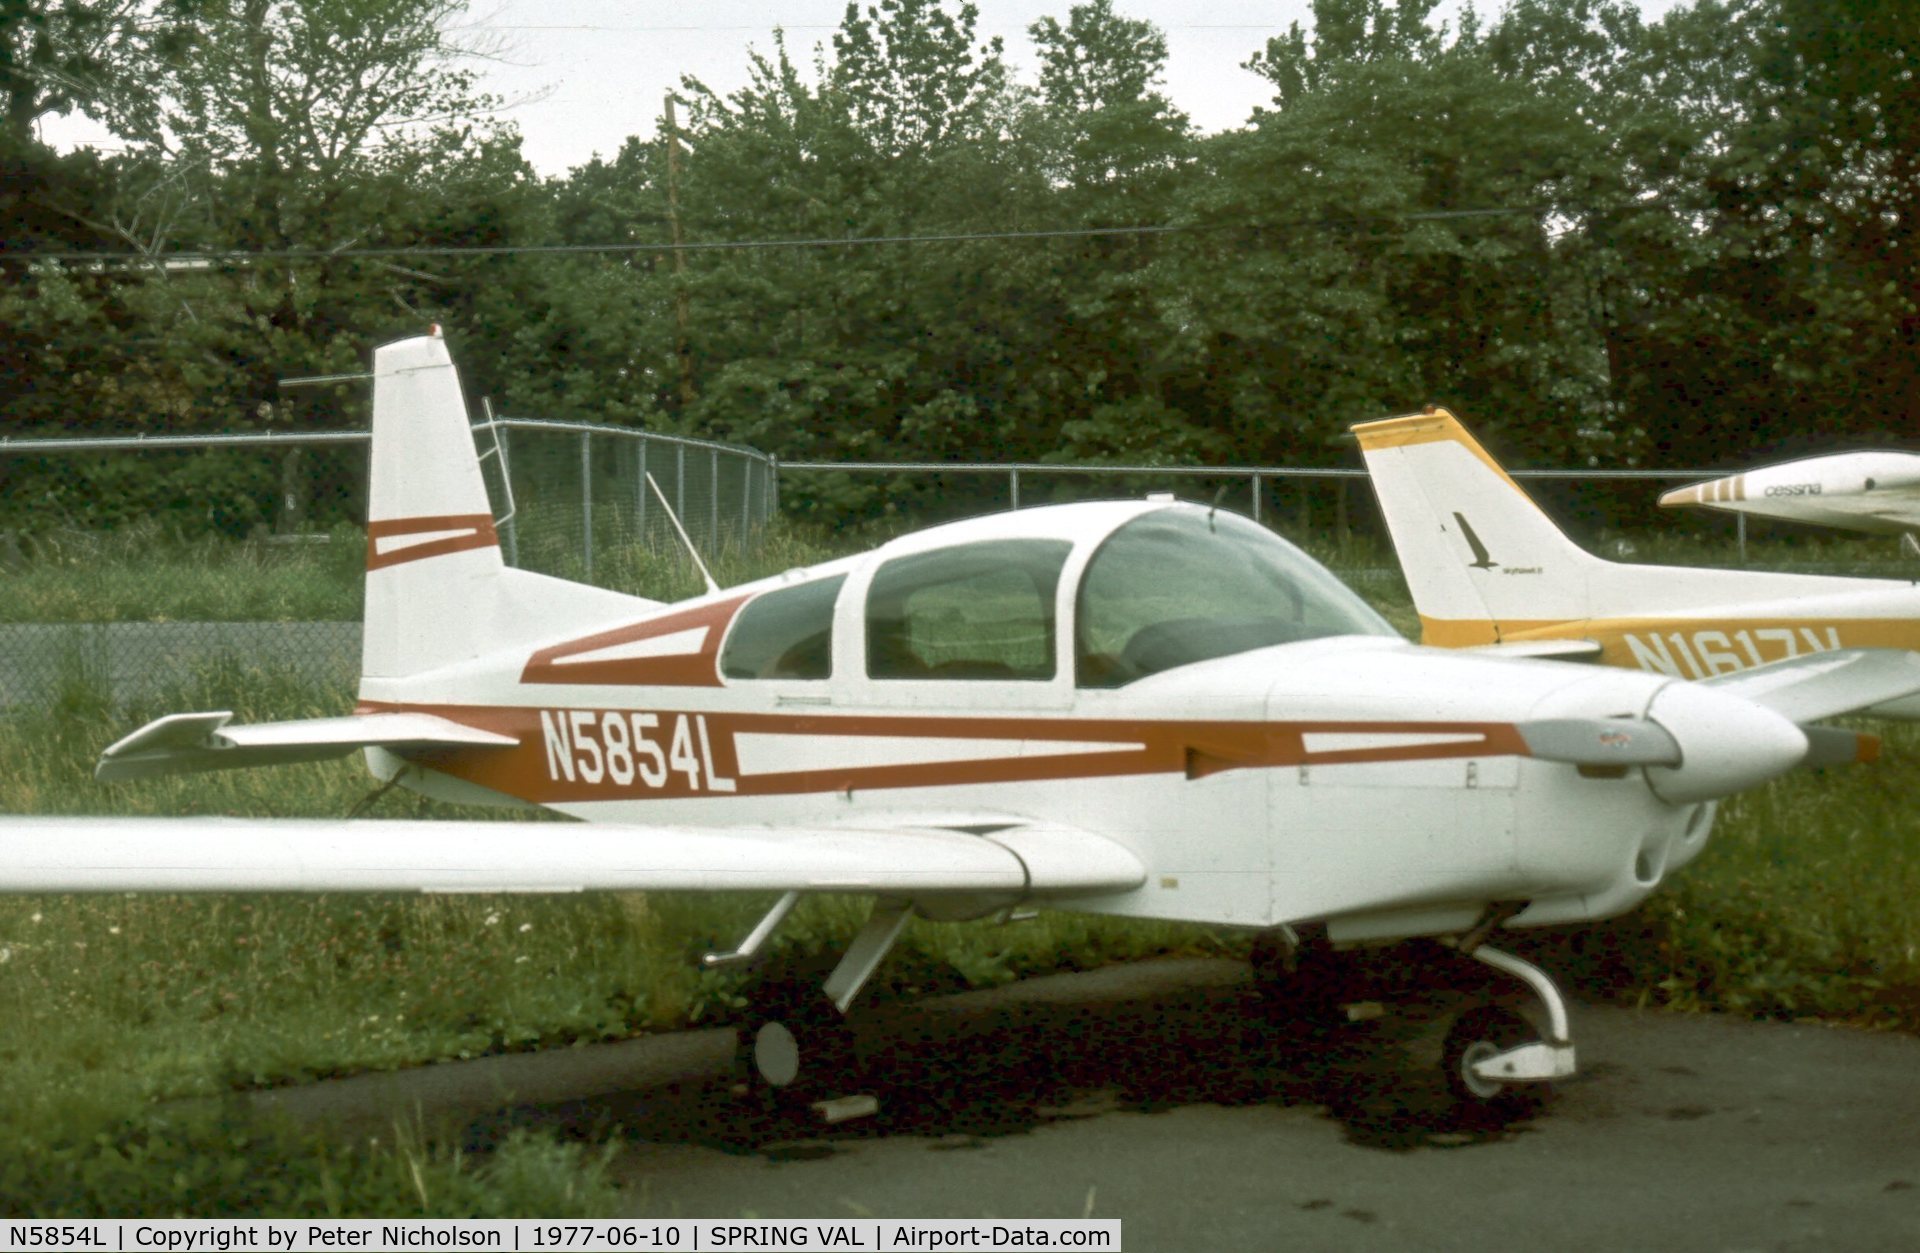 N5854L, 1972 American AA-5 C/N AA5-0254, This AA-5 Traveler was seen at Spring Valley Airport, New York State in the Summer of 1977 - the airport closed in 1985.